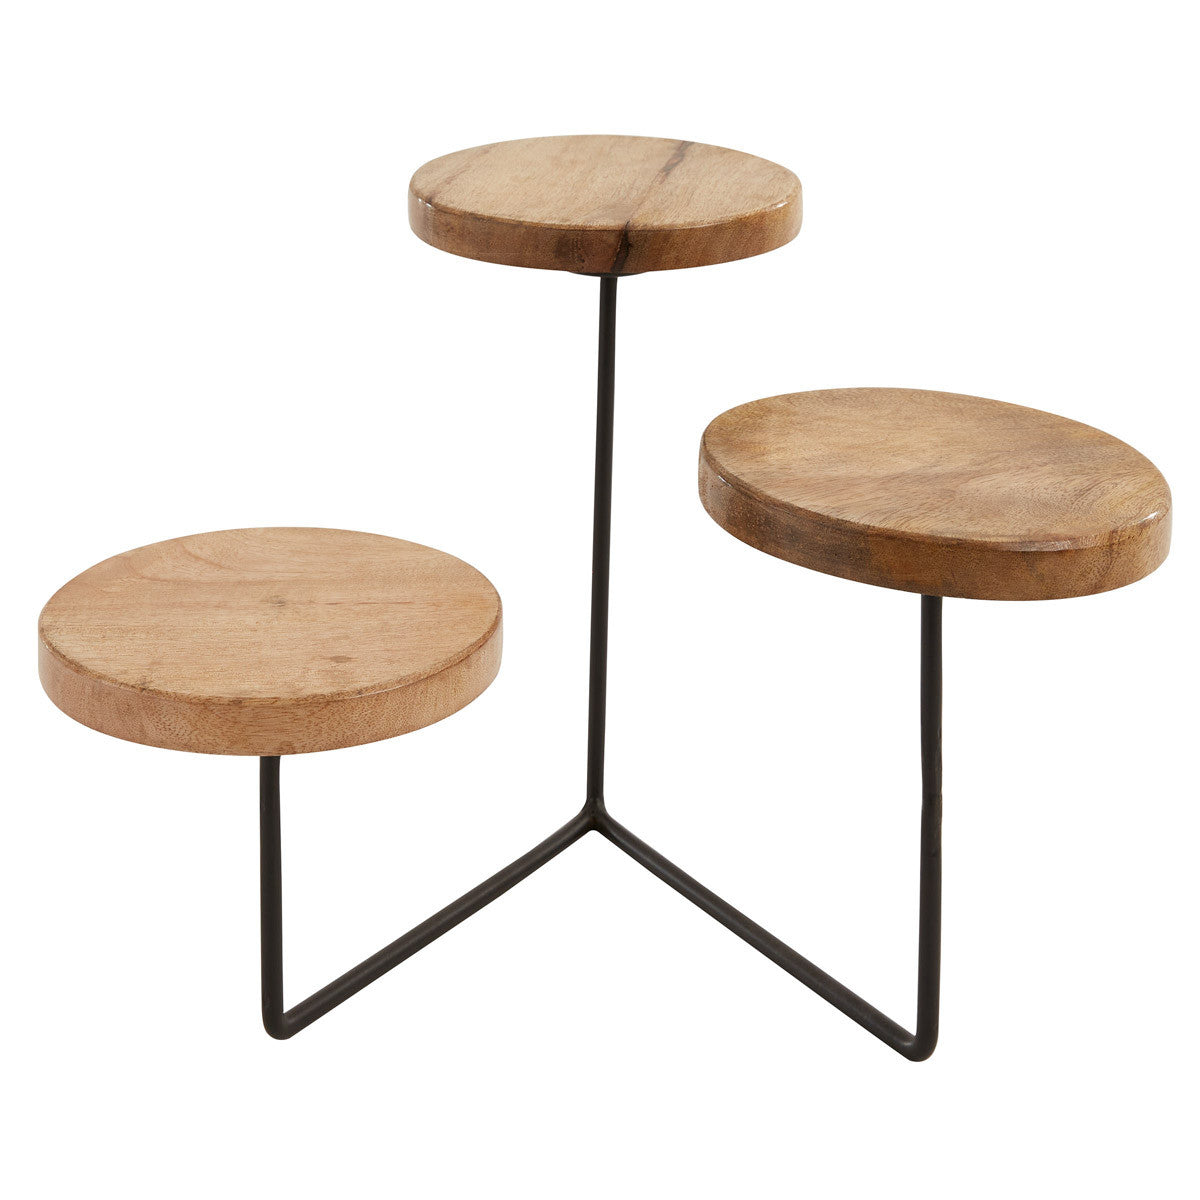 3 Tier Angled Serving Stand - Park Designs